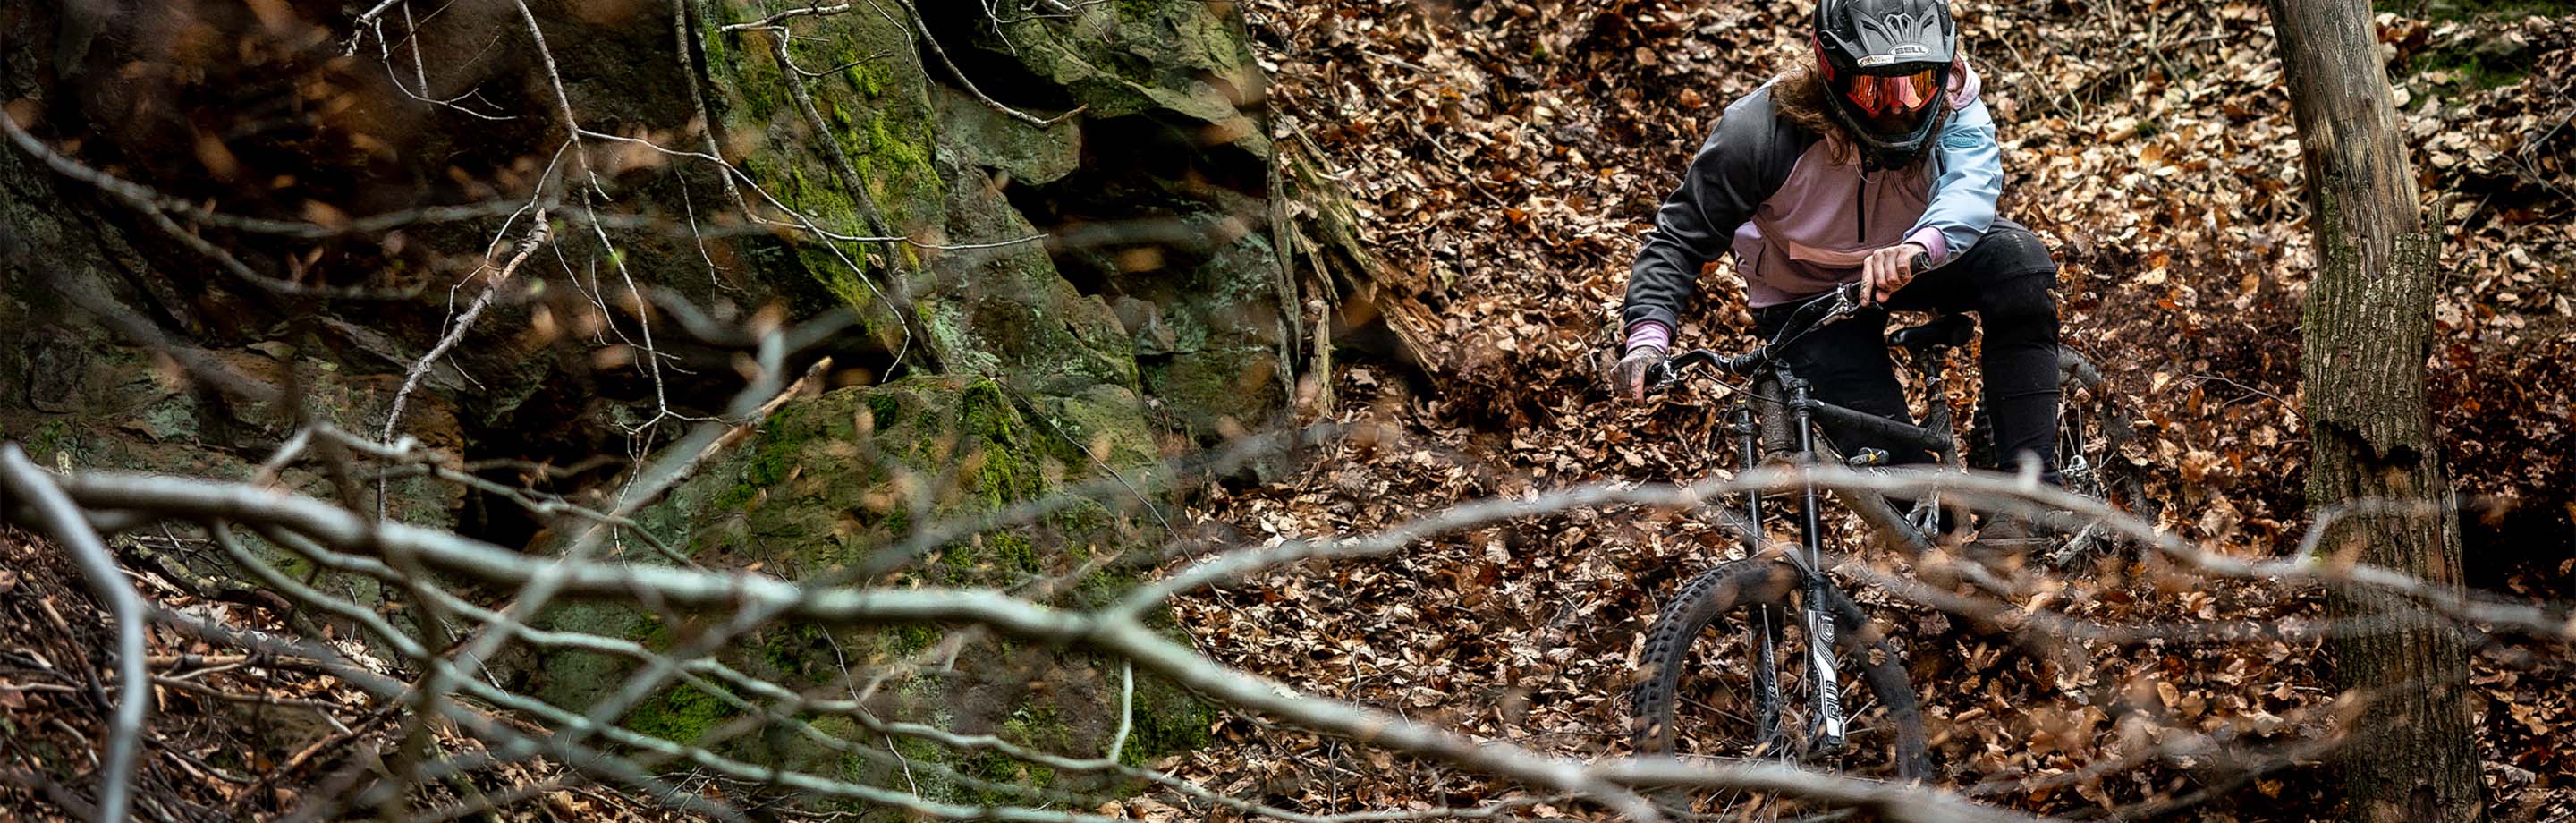  Loose Riders - Gravity Clothing, Components & Accessories from the World's Largest Mtb Club